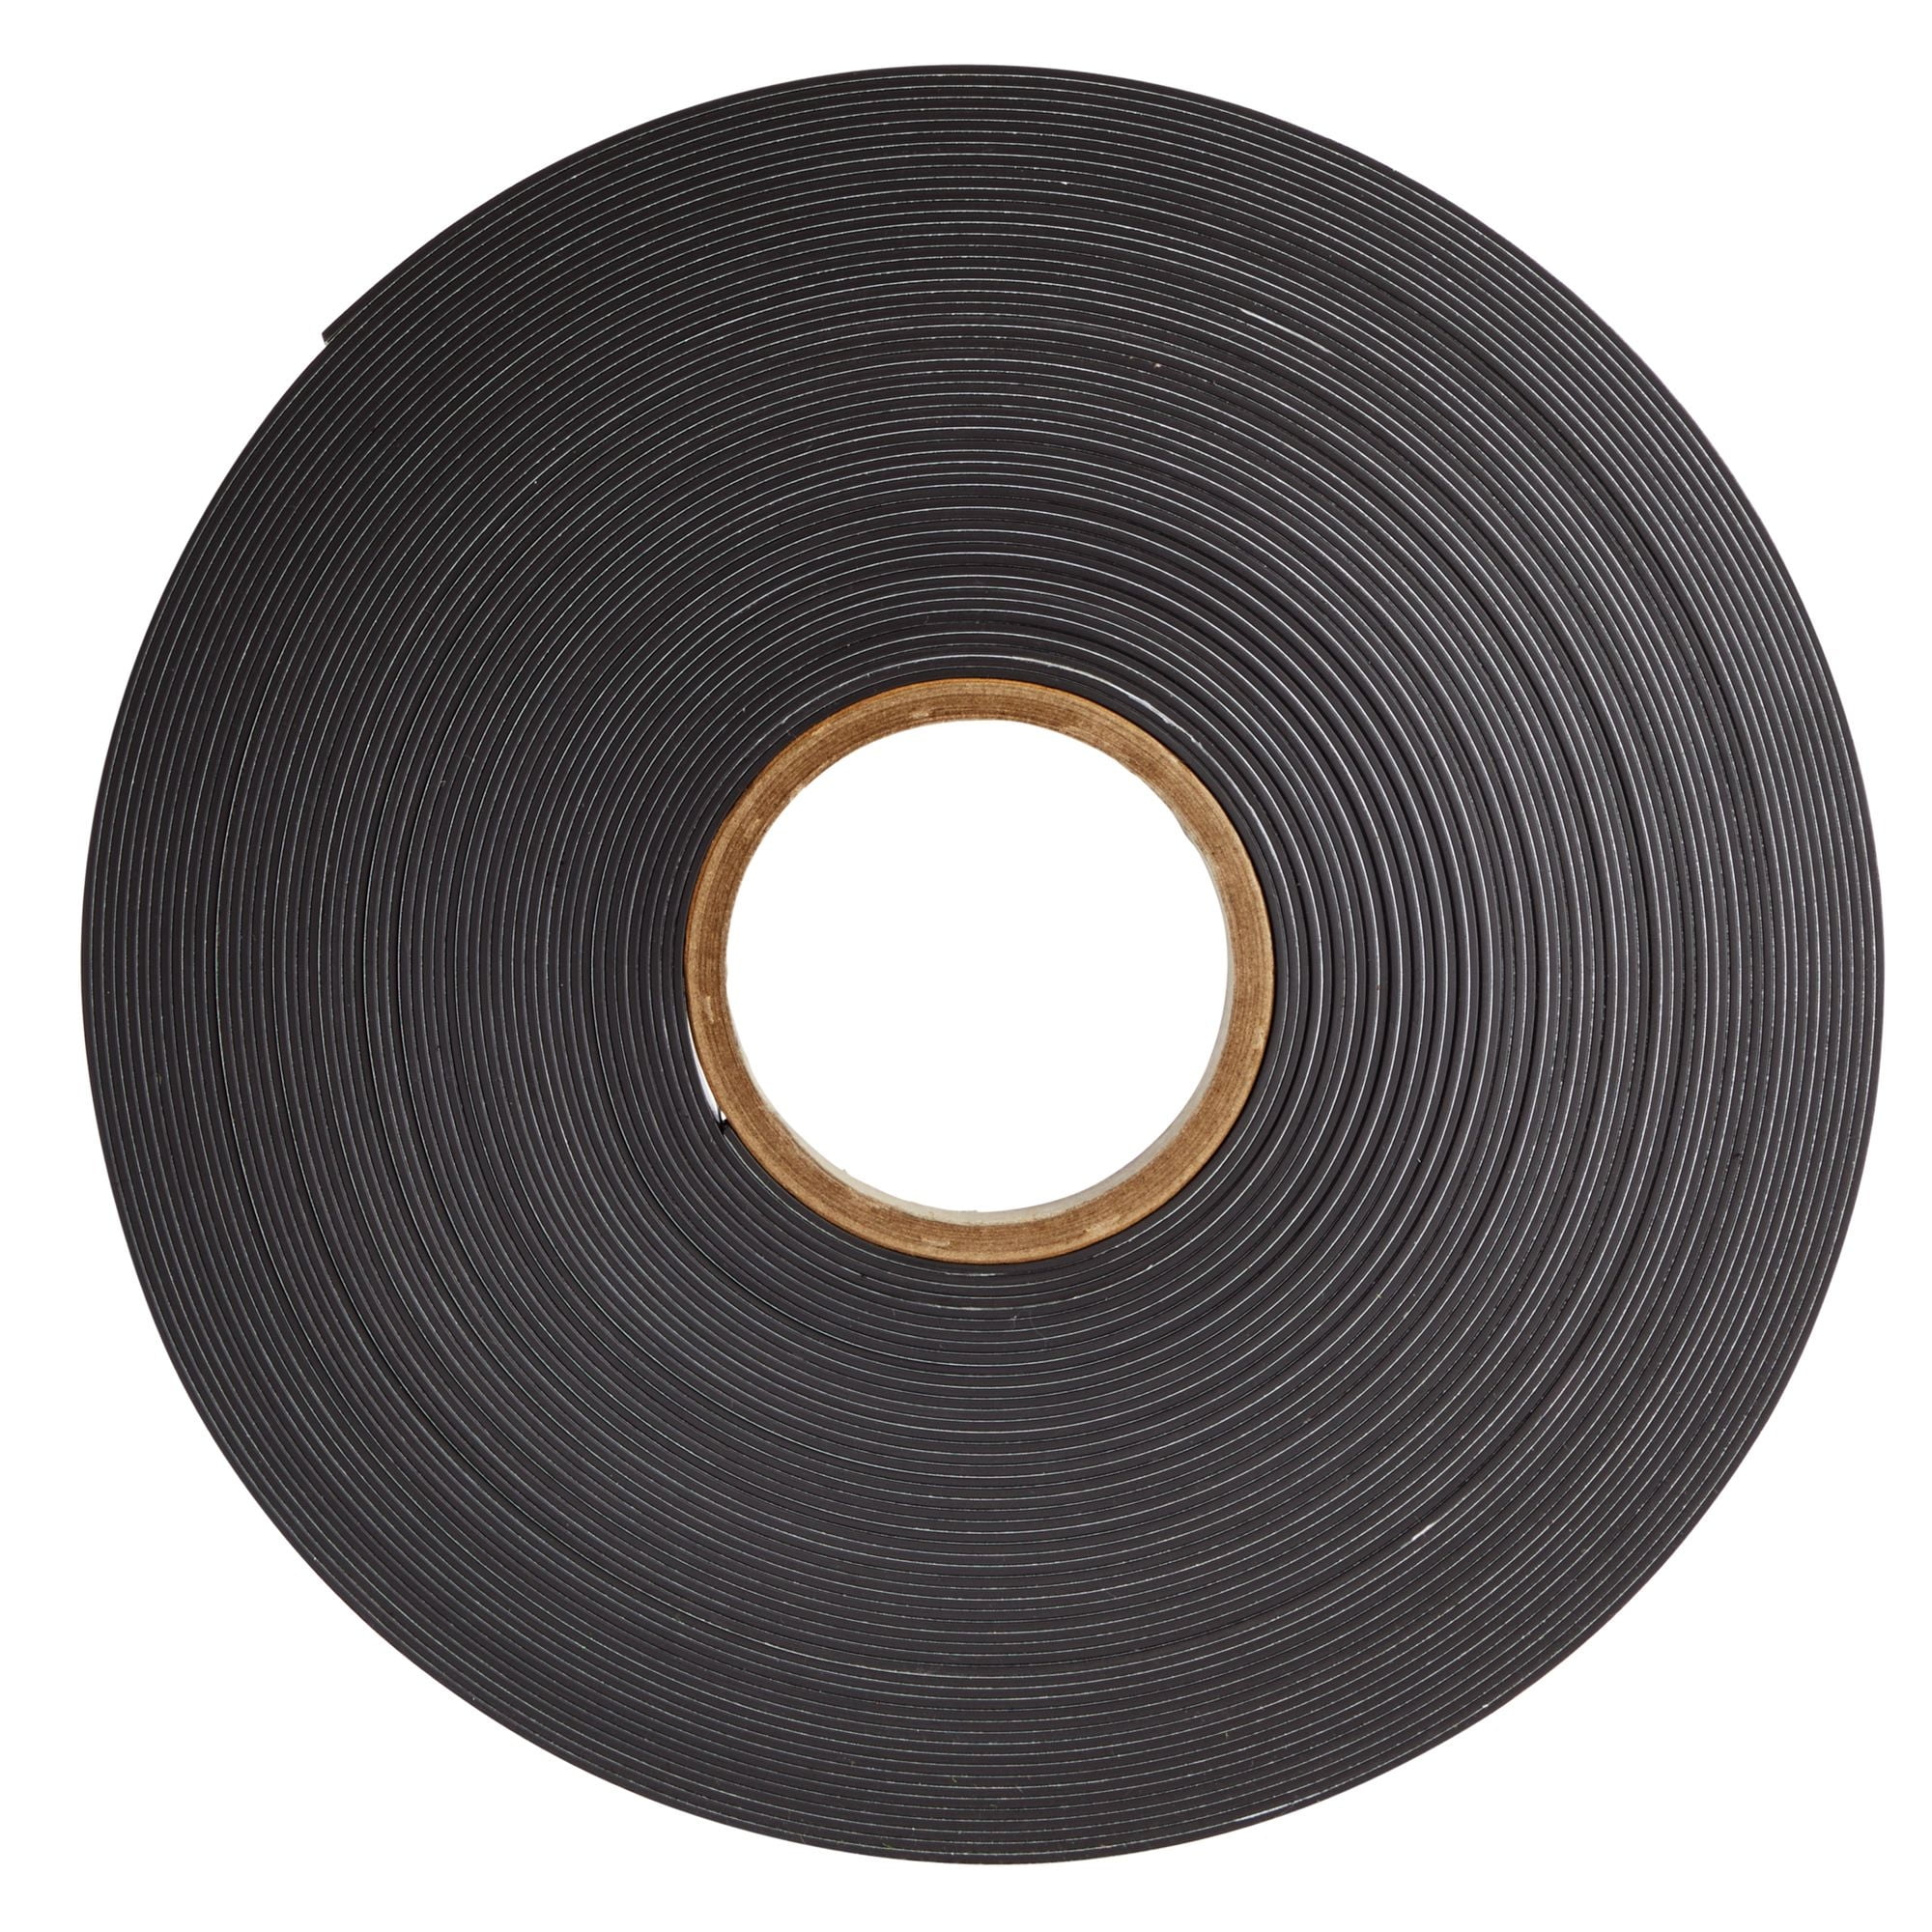 Flexible Magnetic Tape - 1 Inch x 37 Feet 20 mil Thick Magnetic Strip with  Strong Self Adhesive - Ideal Magnetic Roll for Crafts, DIY Projects or  Fridge. Marietta Magnetics Brand.[Pre-Order]